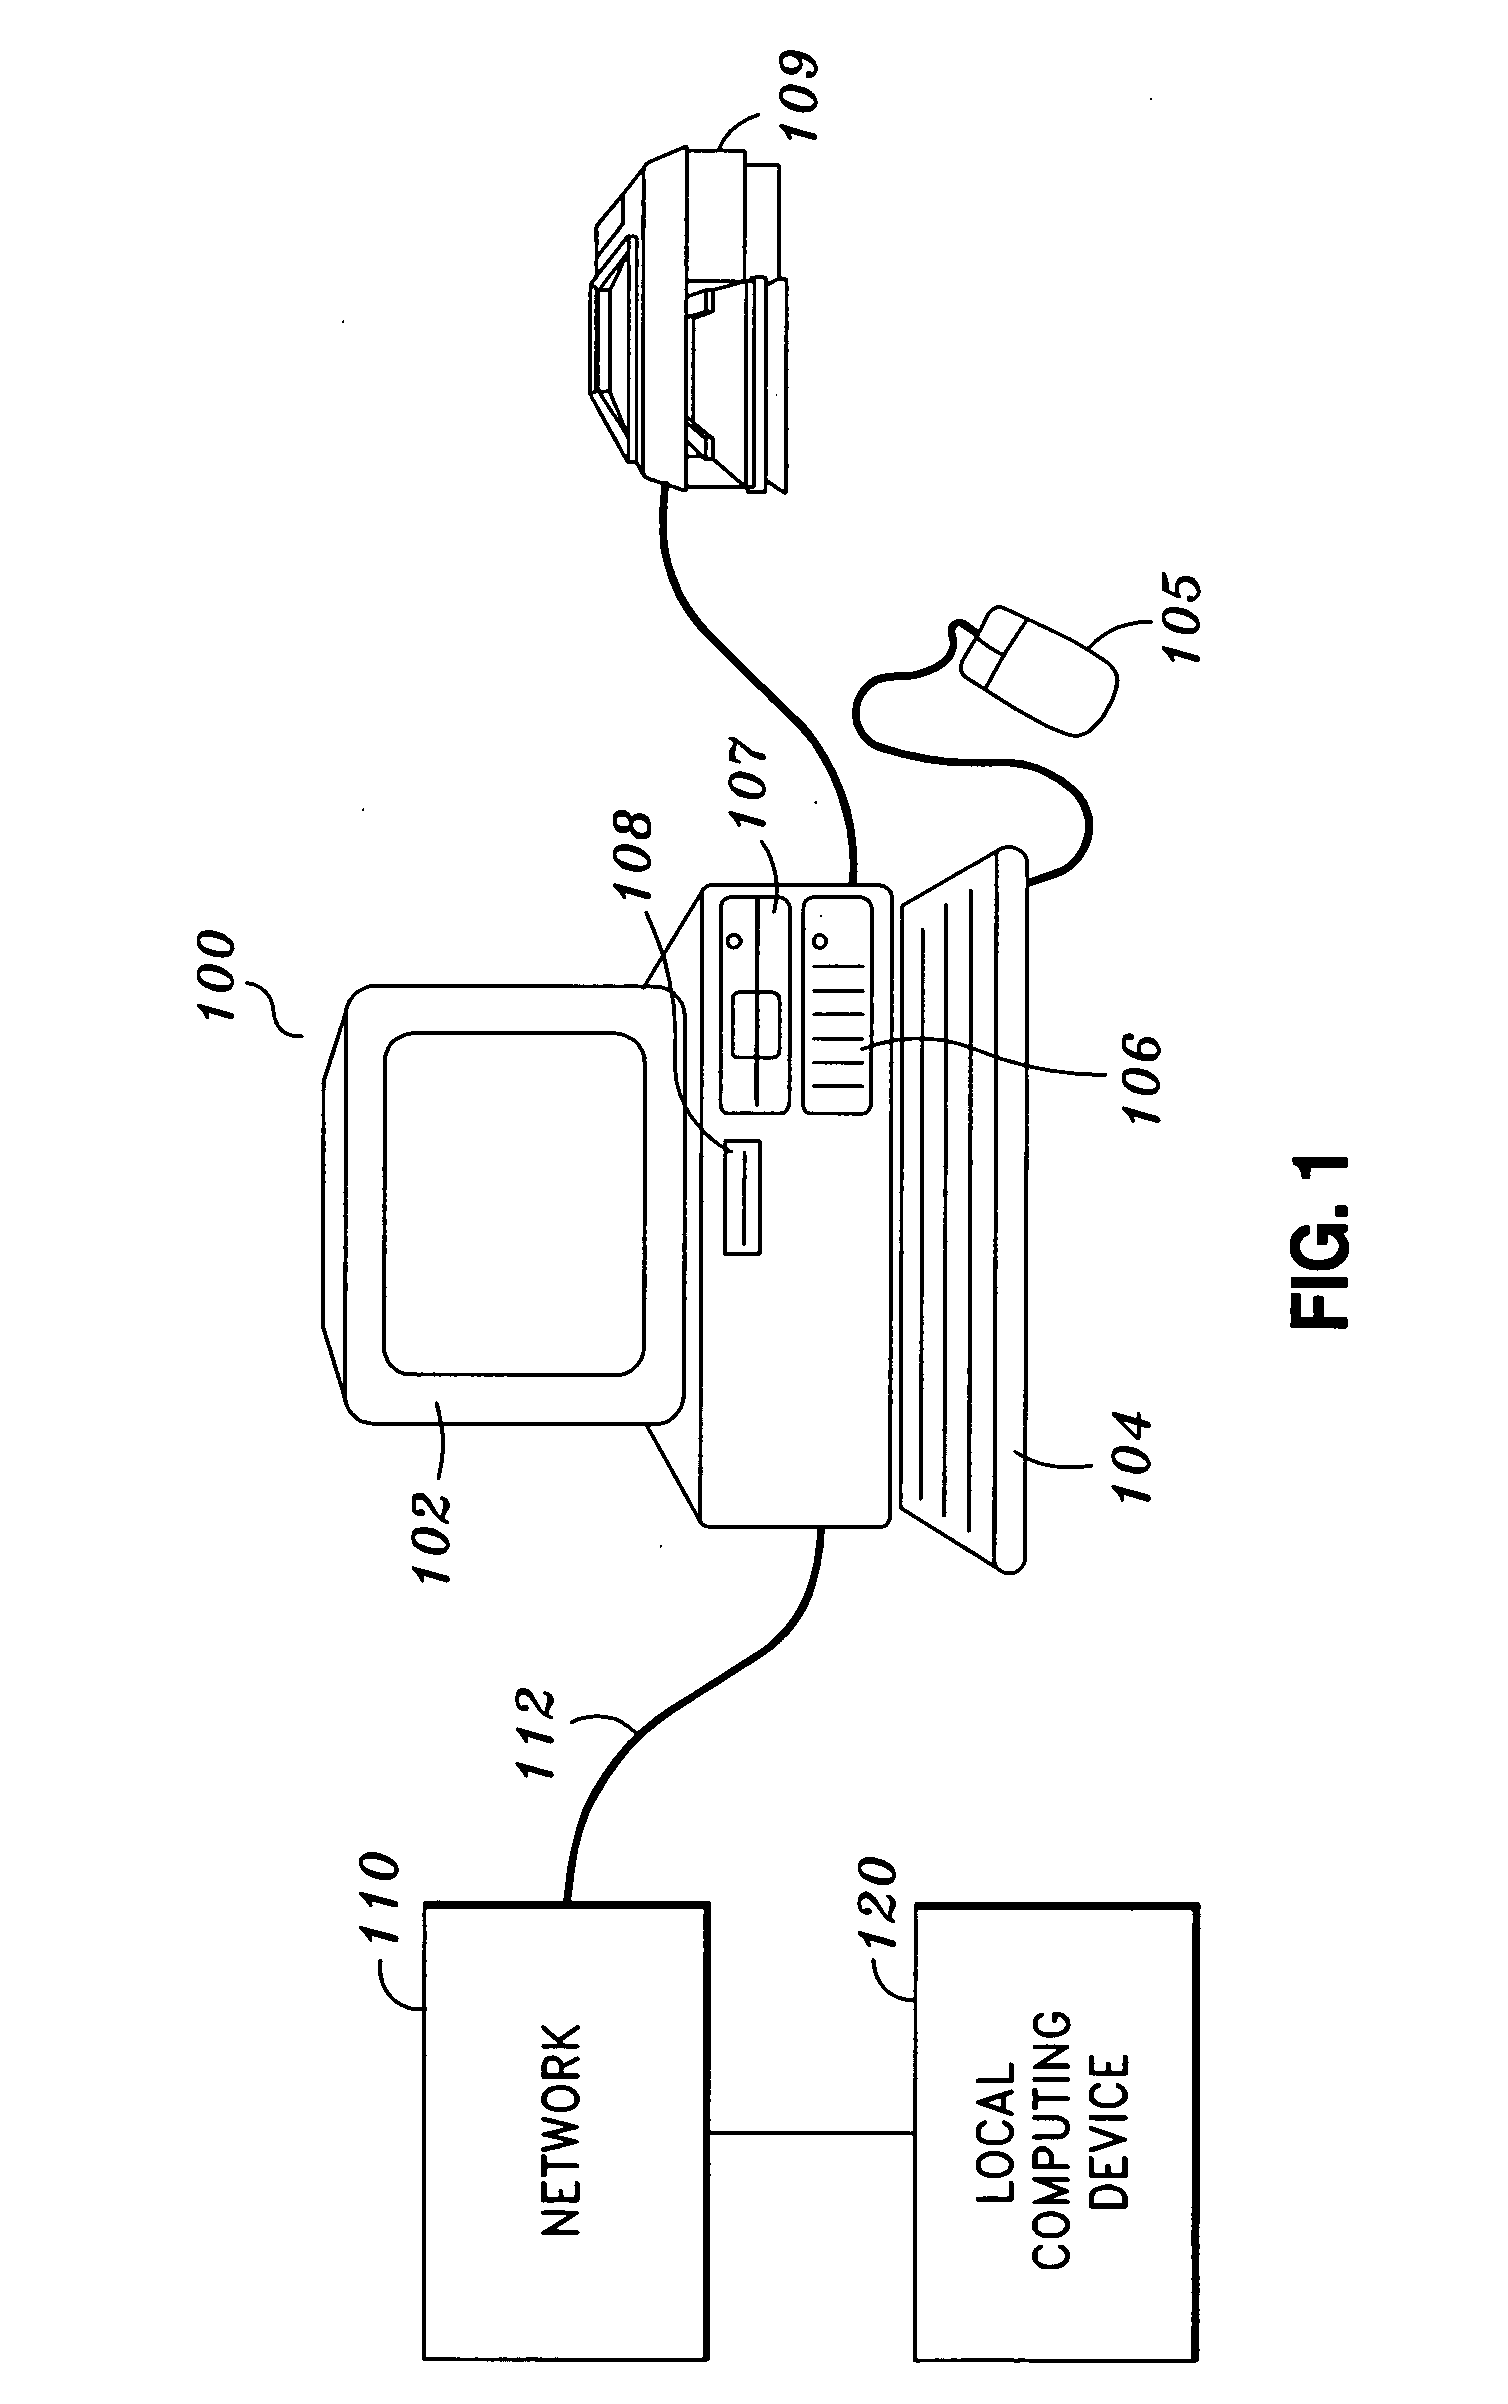 User interface for remote computing devices